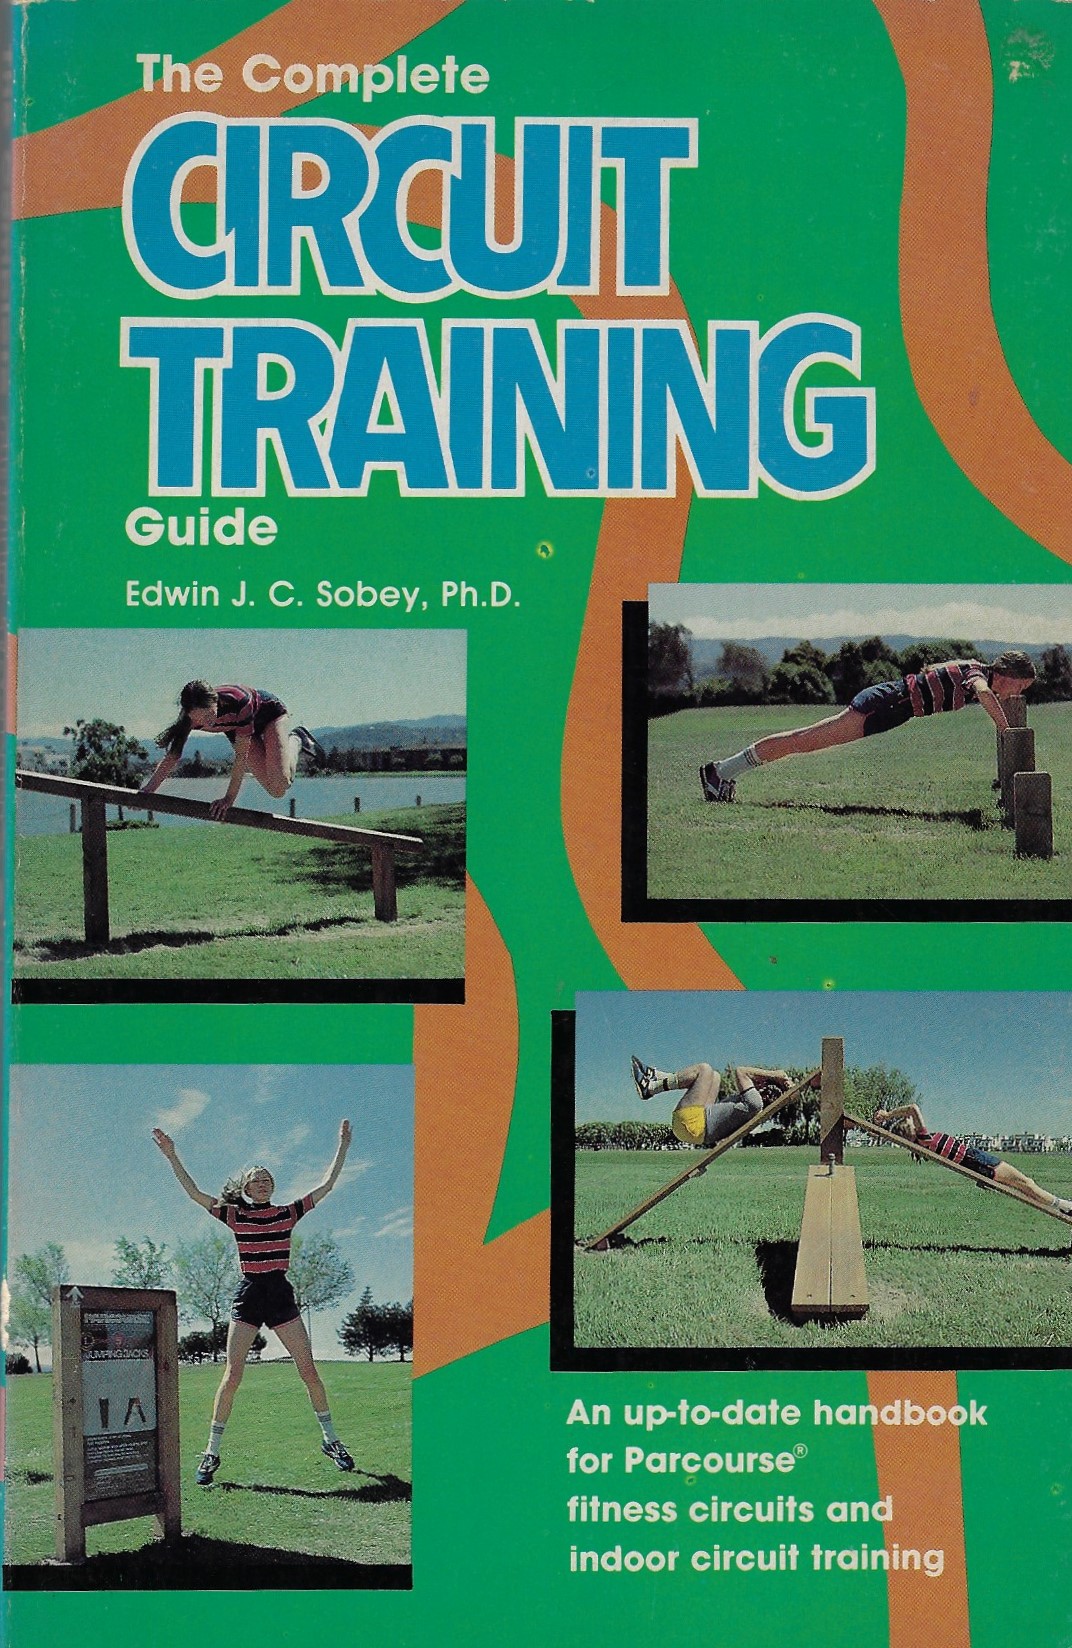 Sobey, Edwin J.C. Ph.D. - The complete circuit training guide